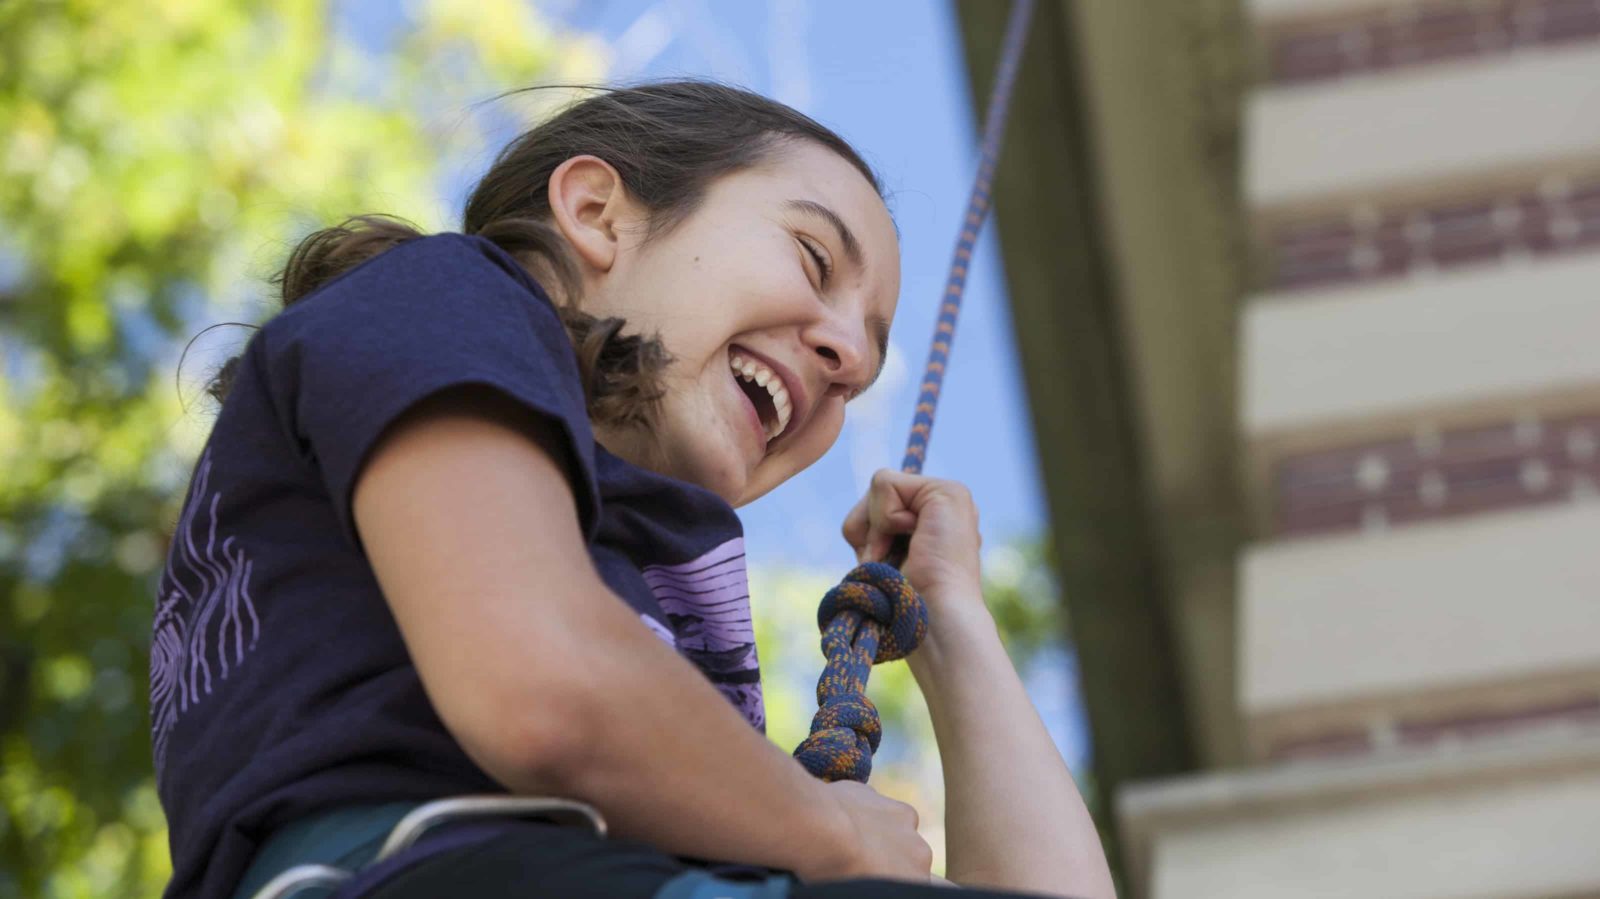 A student rappels from a college building on Mountain Day at Williams College. Students celebrate a fall day with music and outdoor activities.